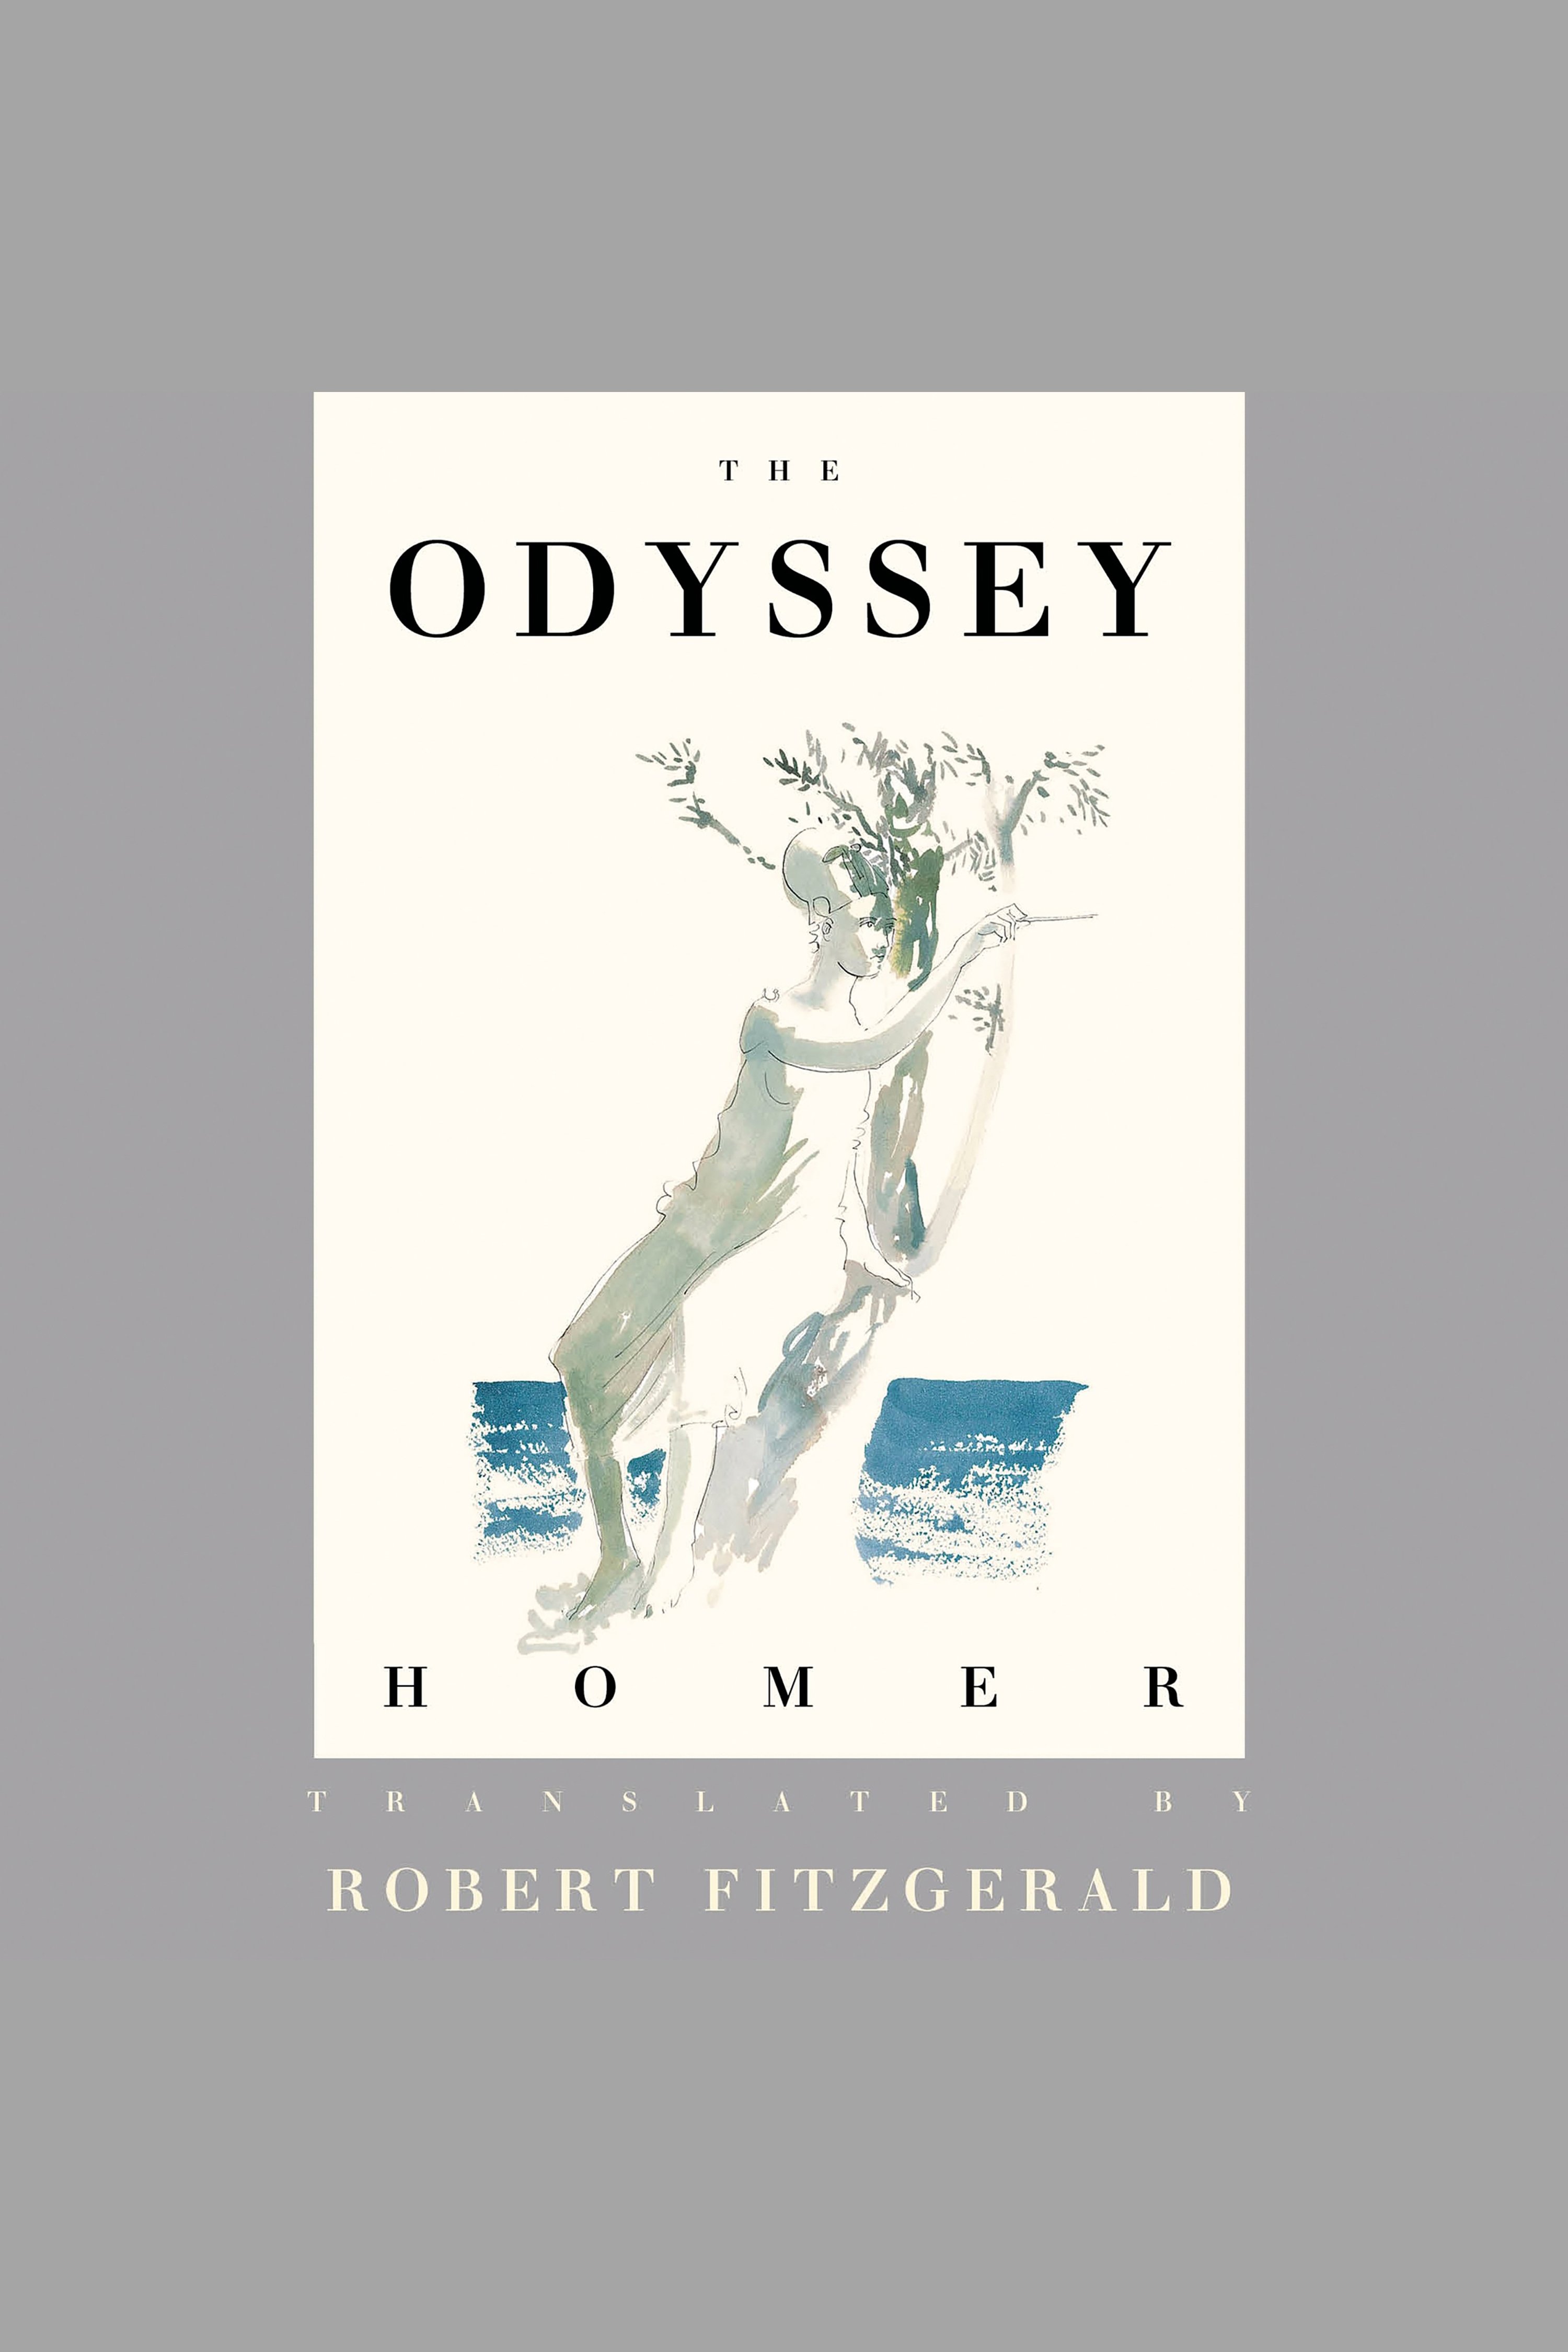 Image de couverture de Odyssey, The [electronic resource] : The Fitzgerald Translation